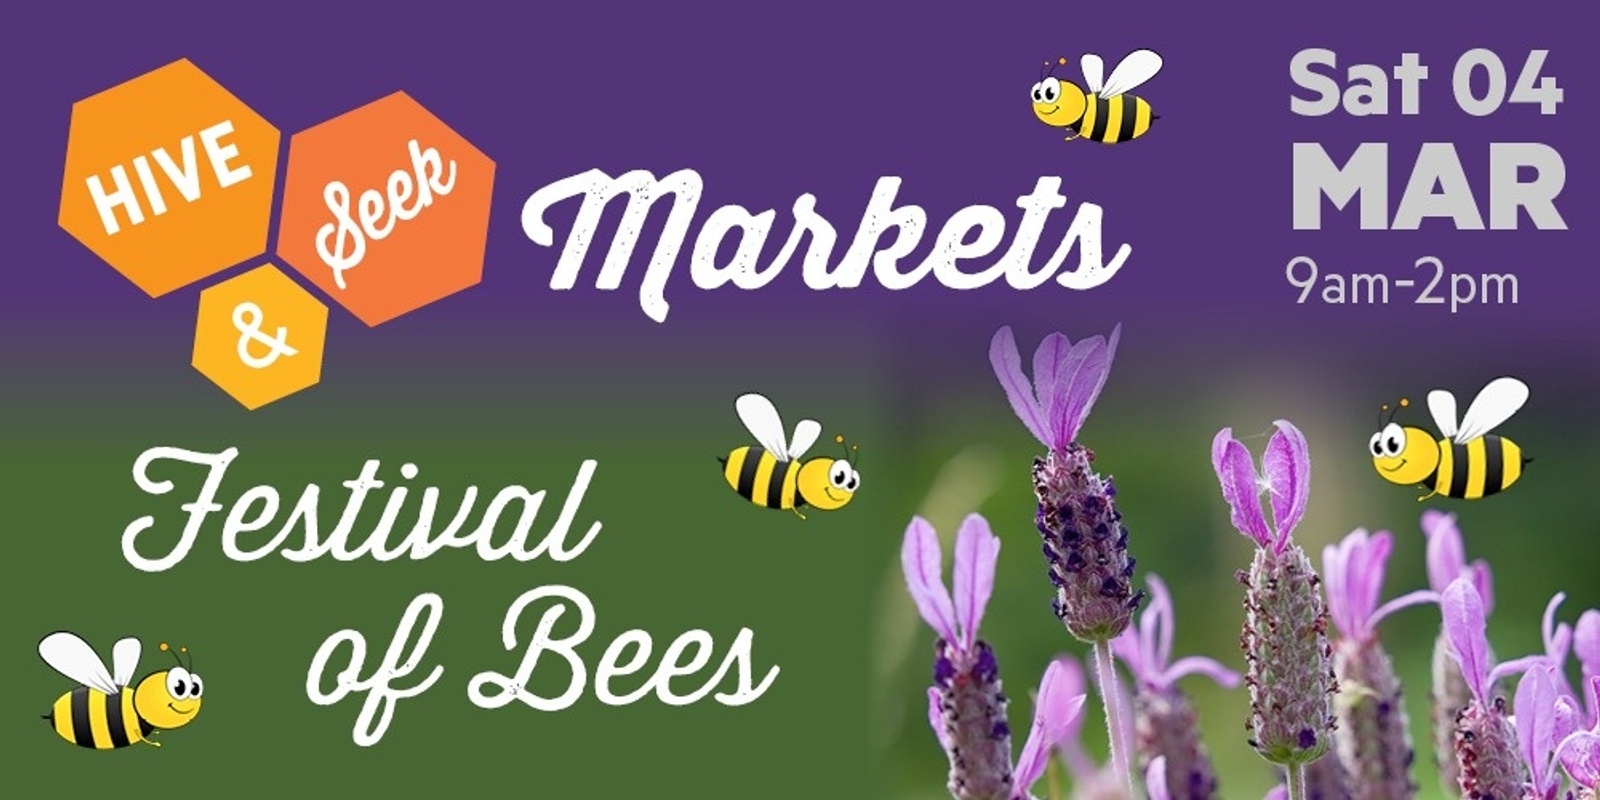 Banner image for Hive & Seek Market: 4 March 2023